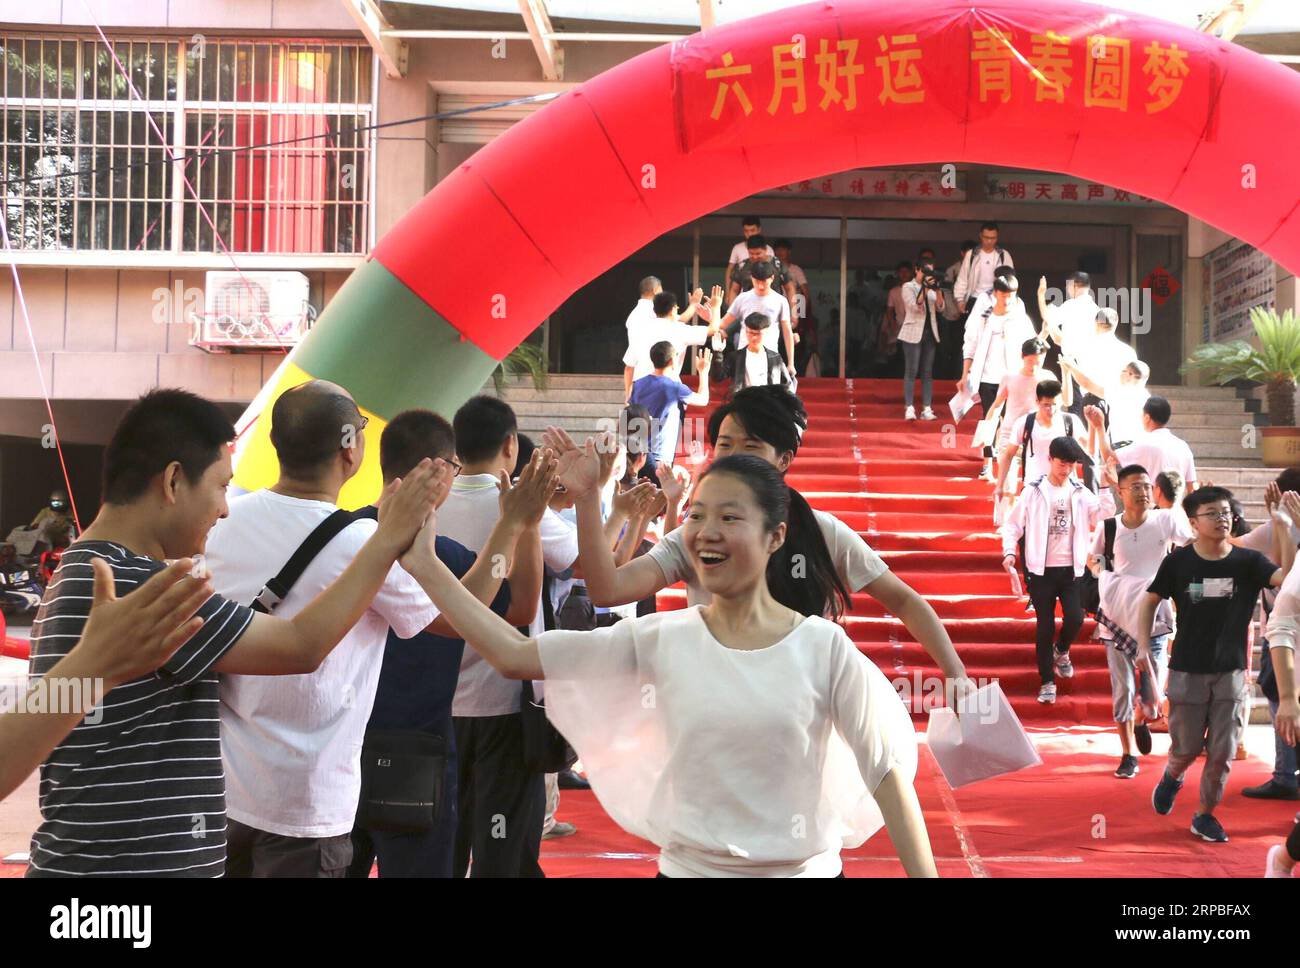 (190607) -- JINING, June 7, 2019 (Xinhua) -- Teachers cheer for examinees at an exam venue at the Experimental Middle School in Zoucheng City, east China s Shandong Province, June 7, 2019. China s national college entrance examination, or Gaokao, started Friday this year. (Xinhua/Wang Qisheng) CHINA-NATIONAL COLLEGE ENTRANCE EXAM (CN) PUBLICATIONxNOTxINxCHN Stock Photo